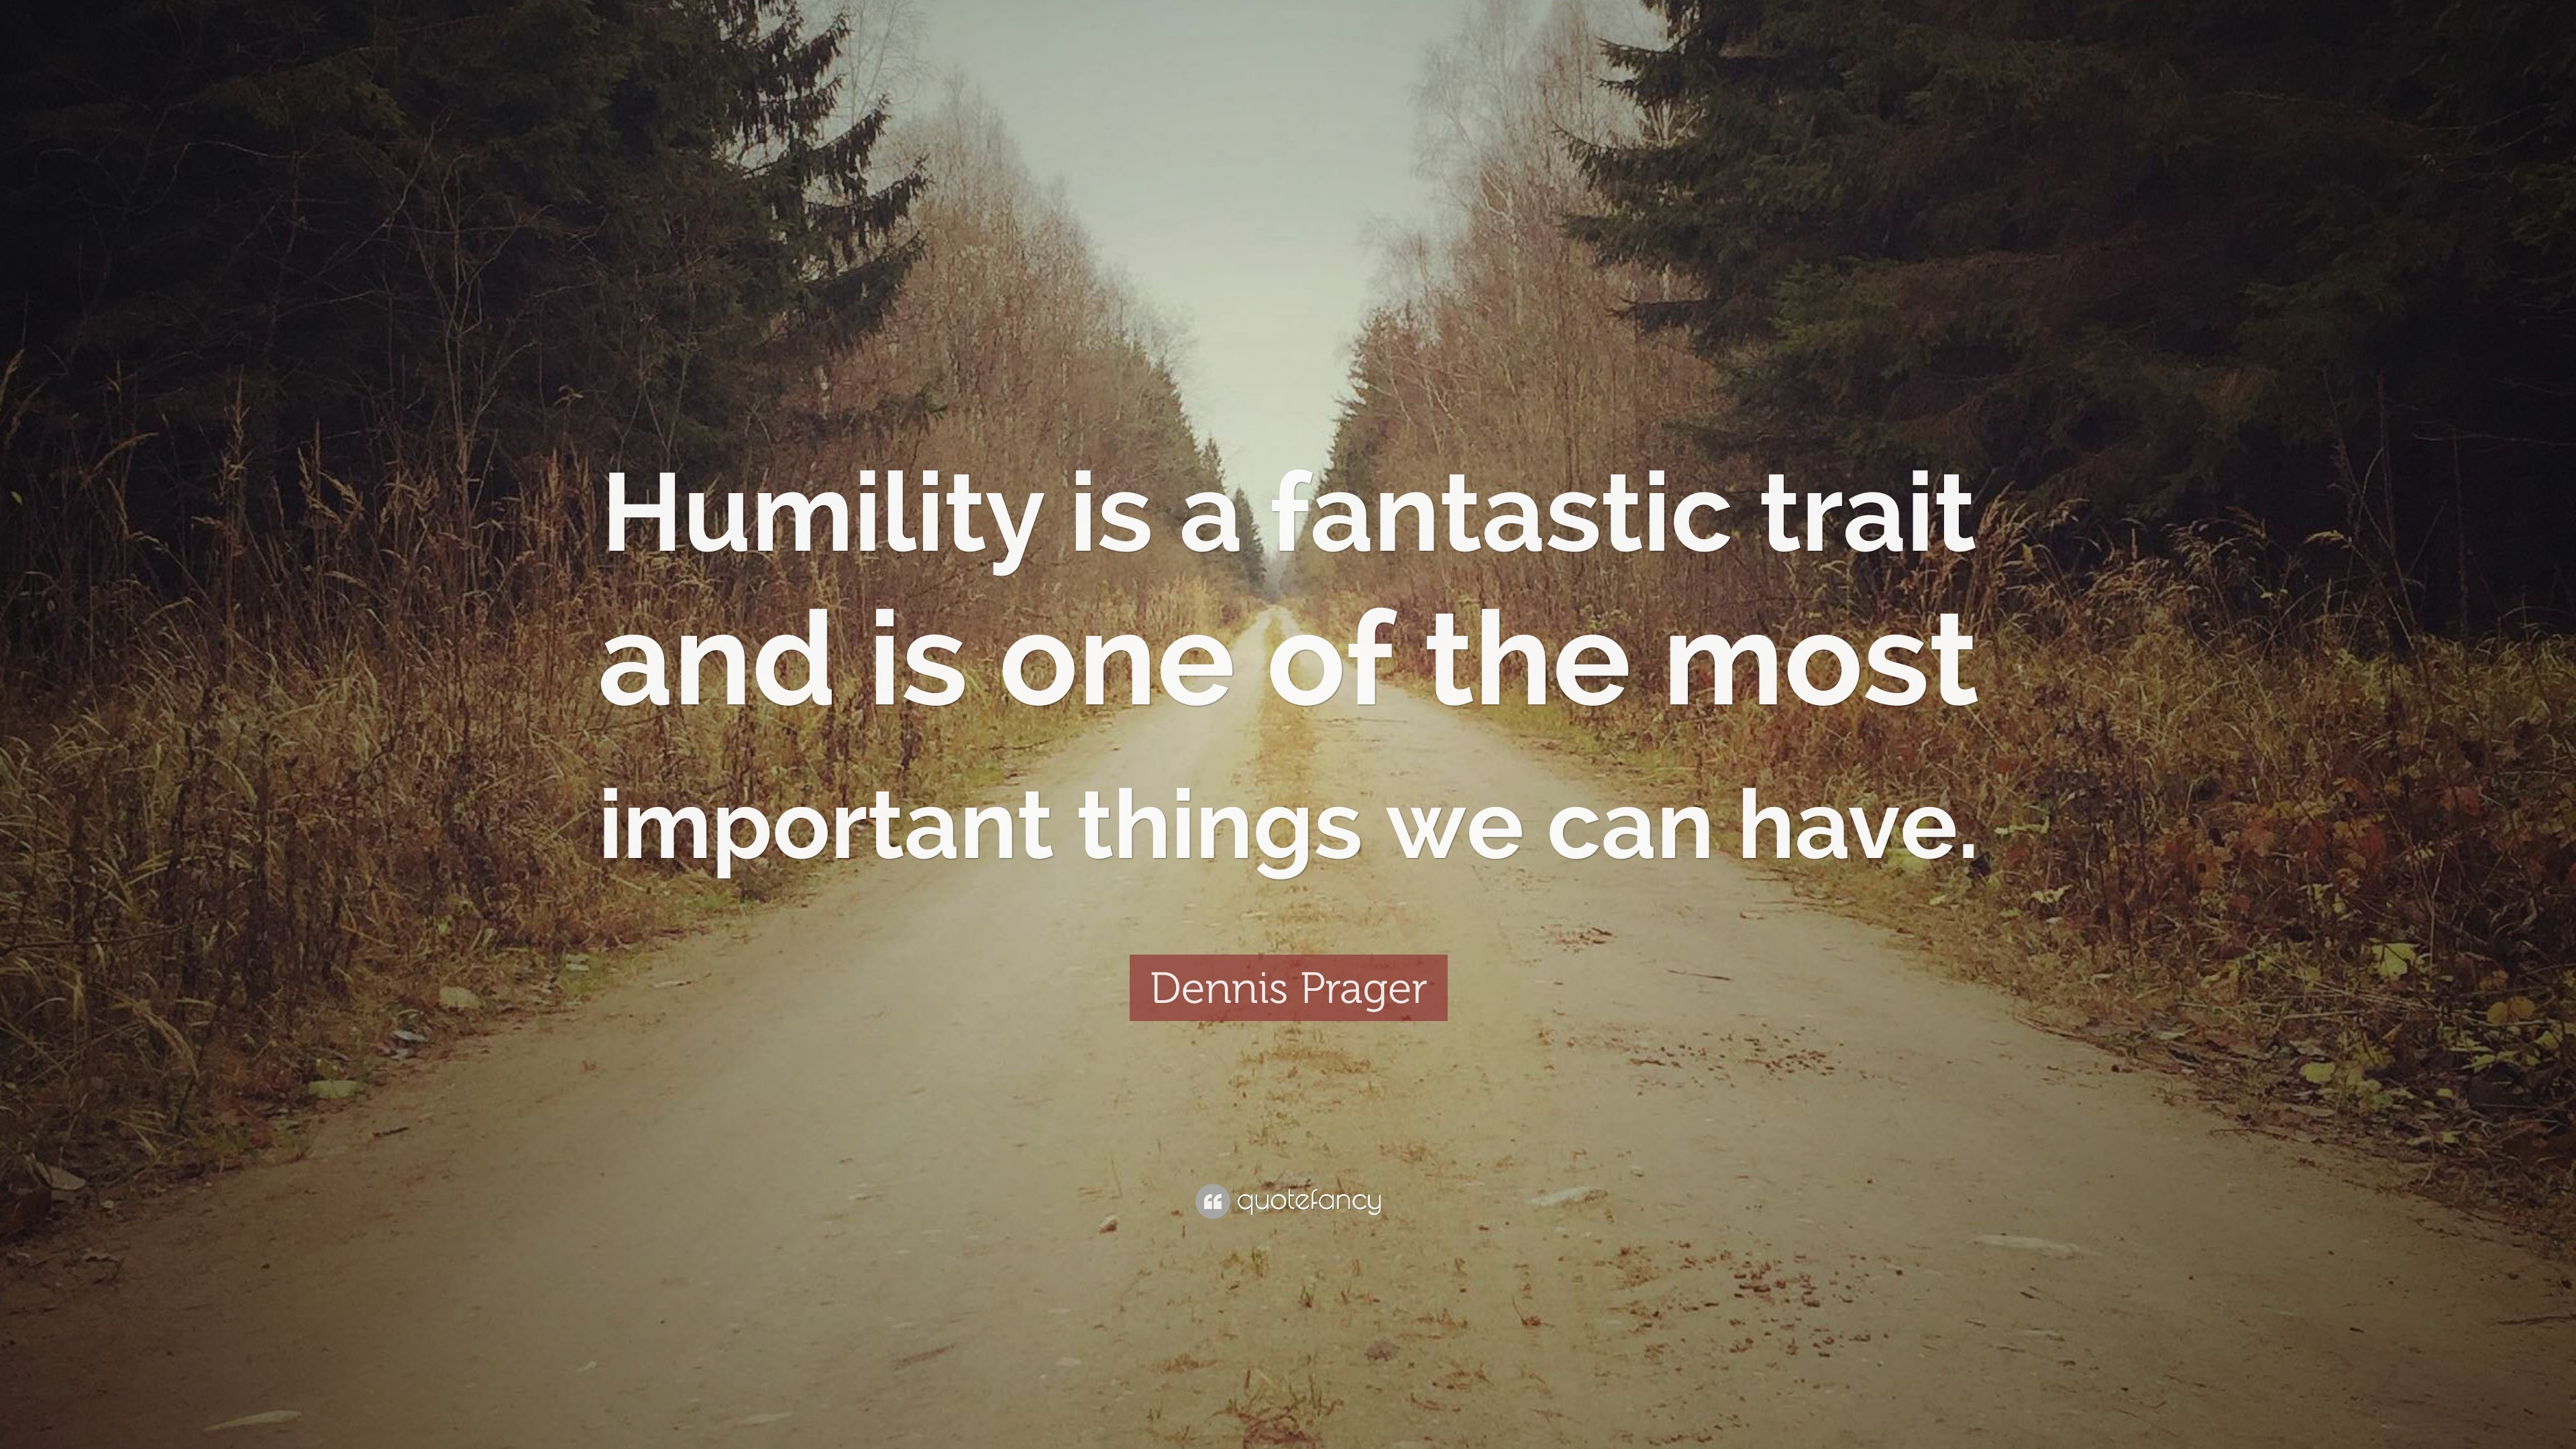 Dennis Prager Quote: “Humility is a fantastic trait and is one of the ...